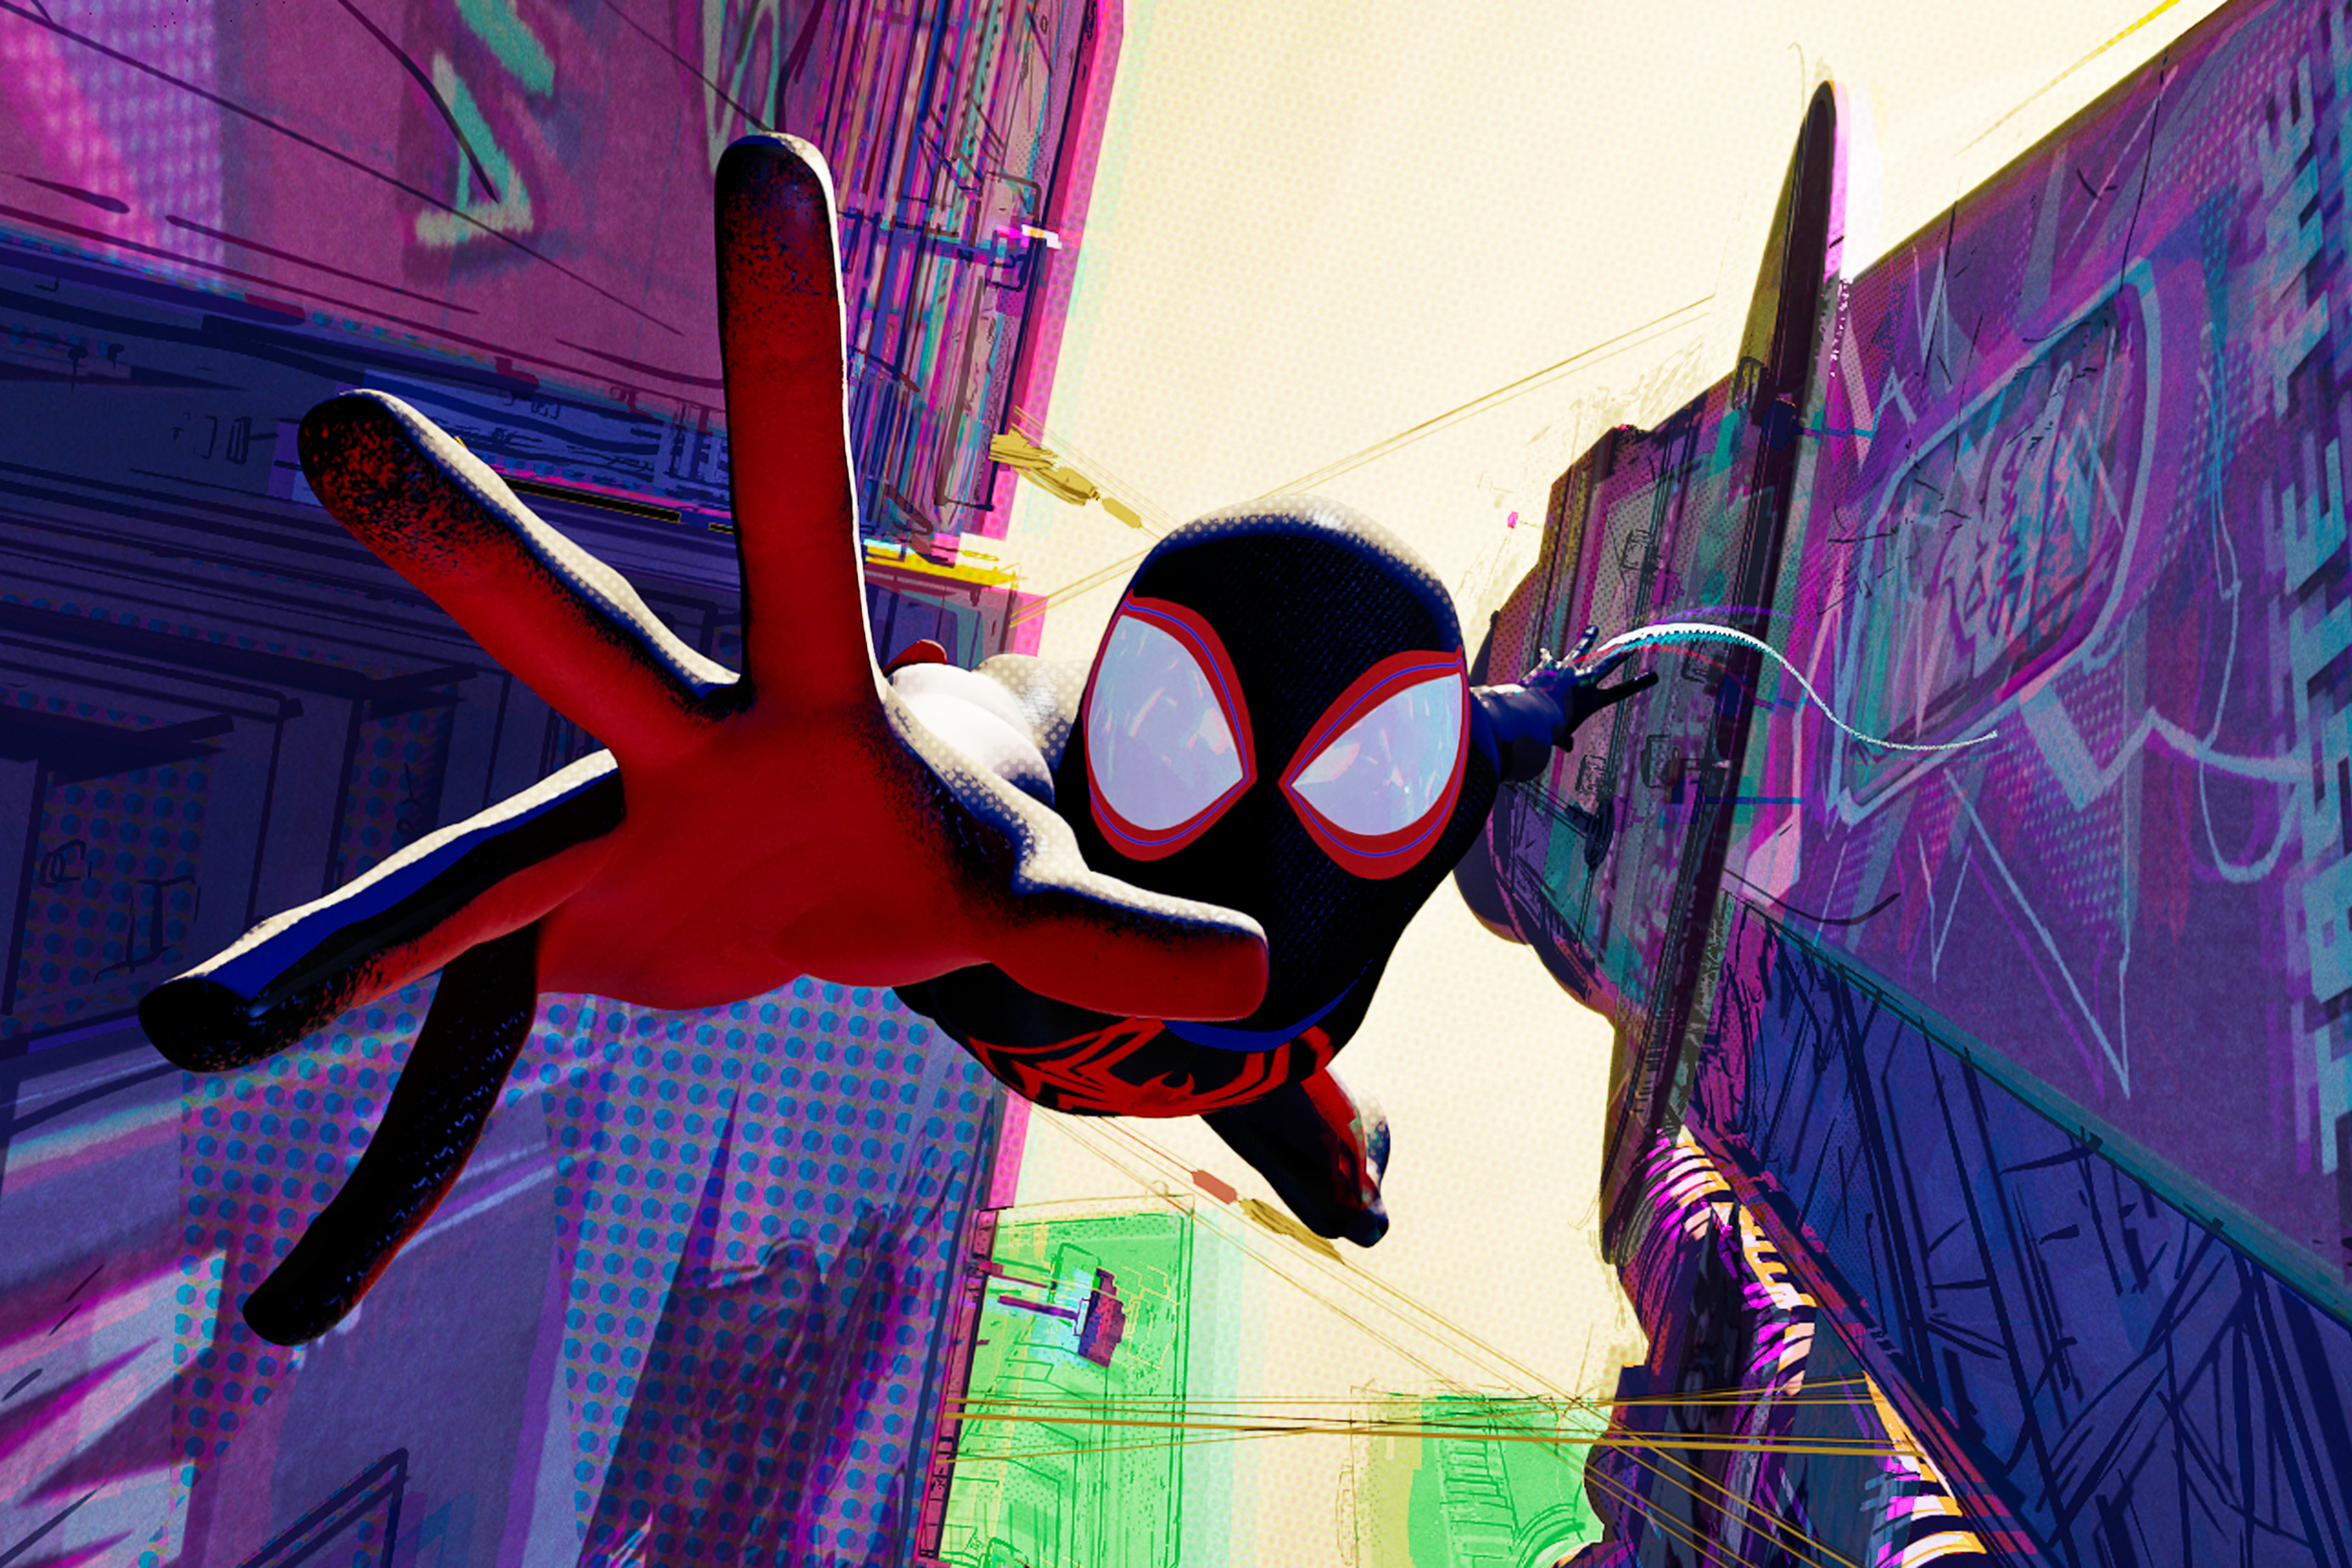 Miles Morales falls in between two buildings in Spider-Man: Across the Spider-Verse.